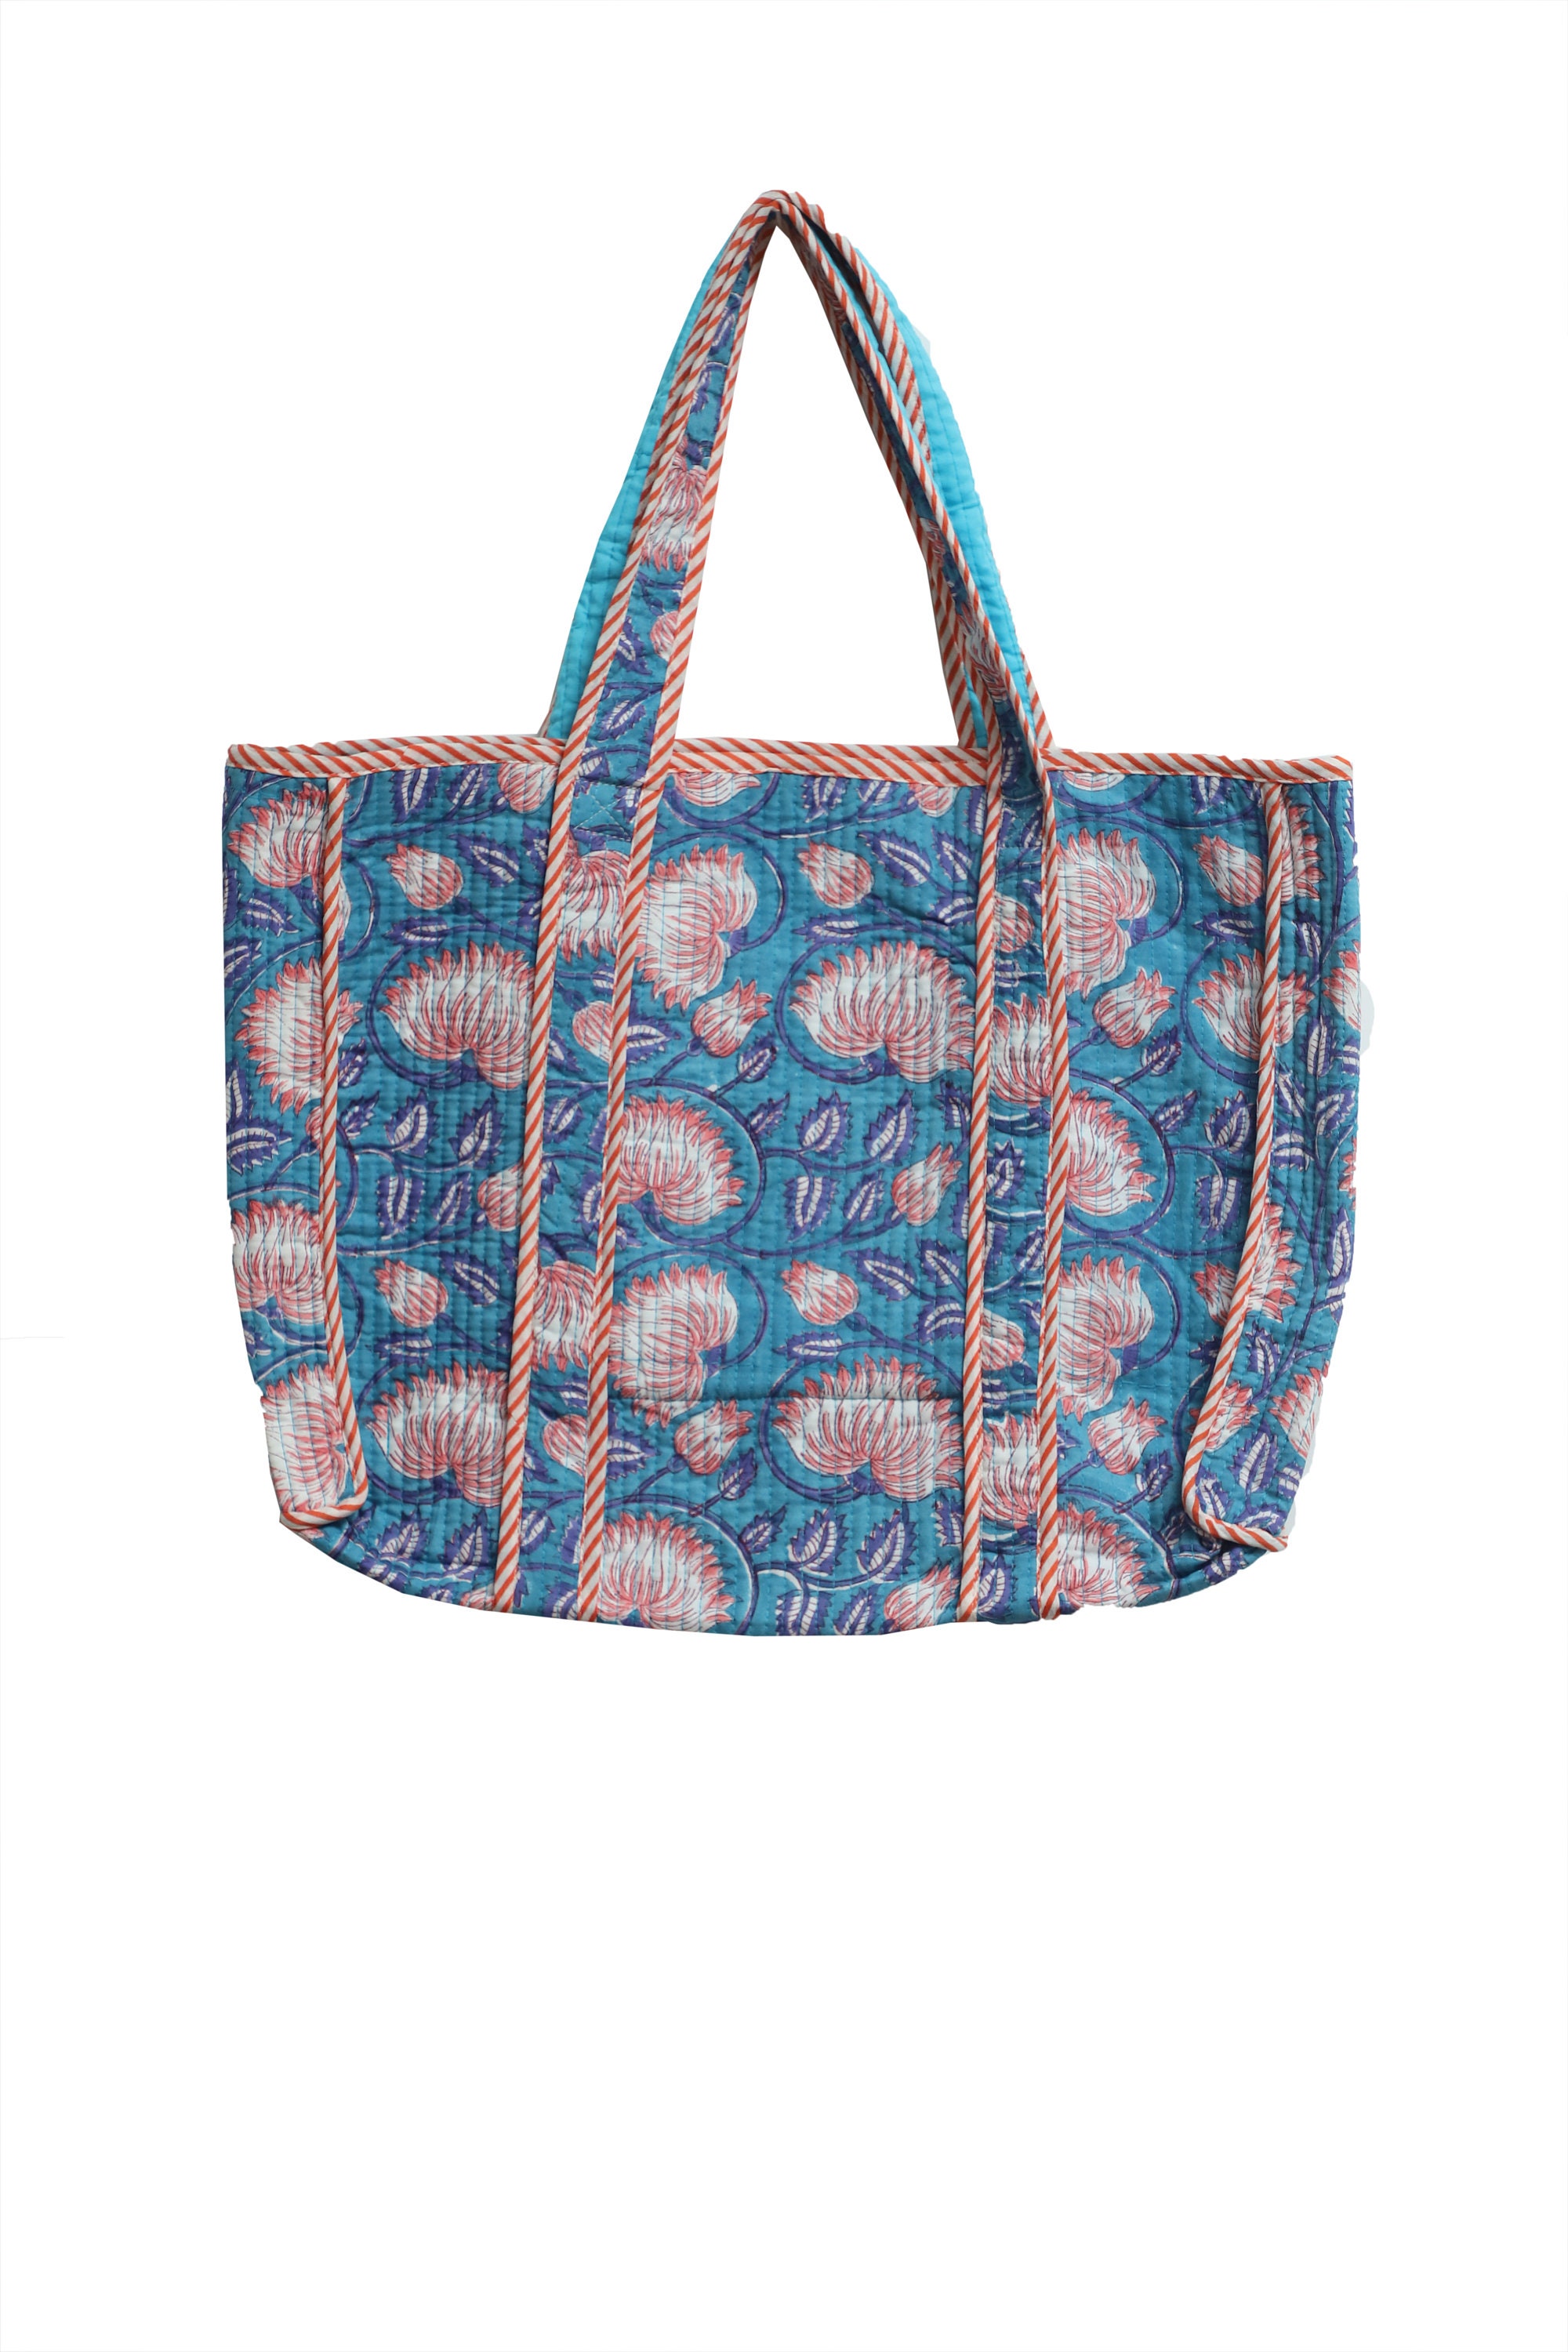 QURA Printed Kantha Patchwork Tote Bag For Women (Blue, OS)